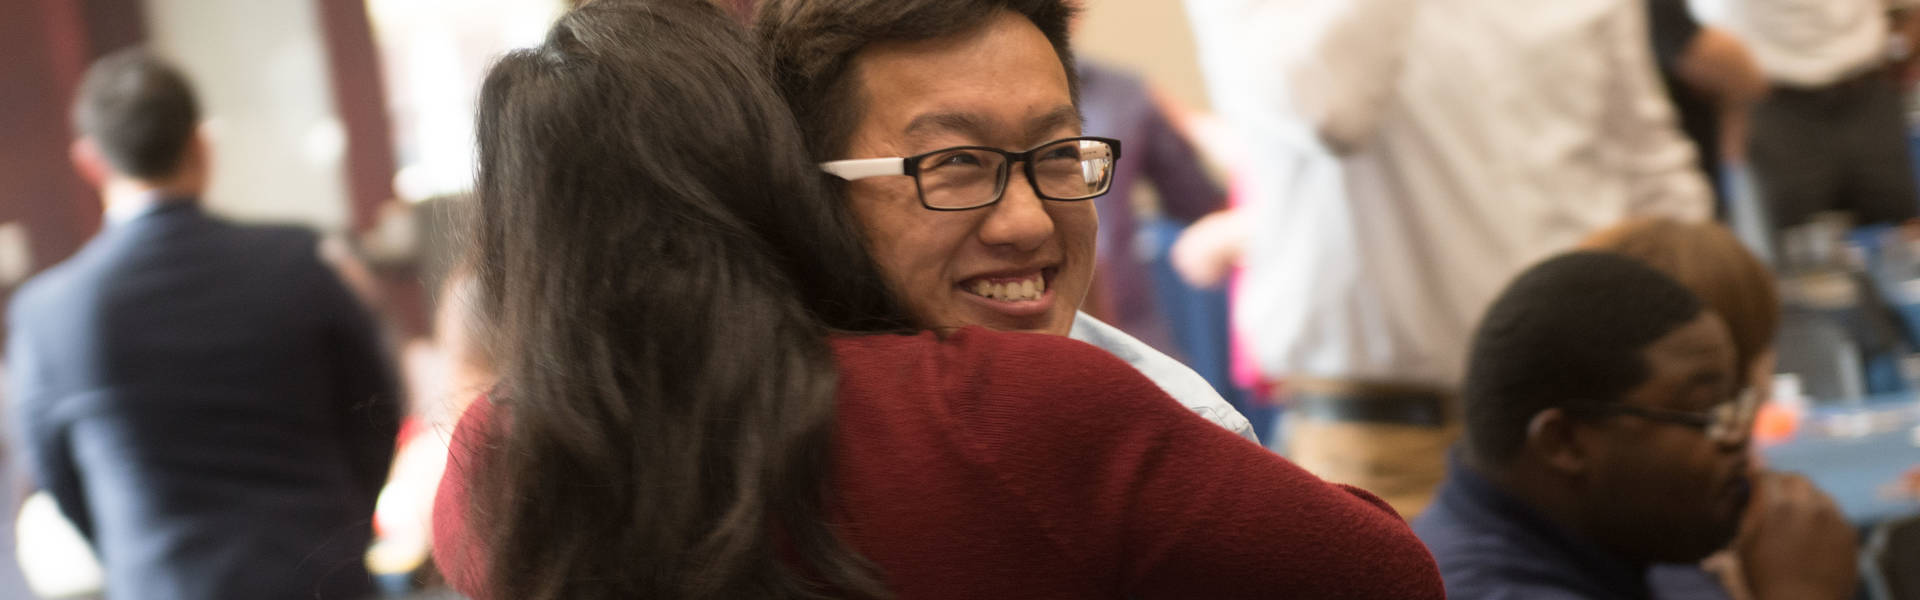 students embracing at OMA ceremony